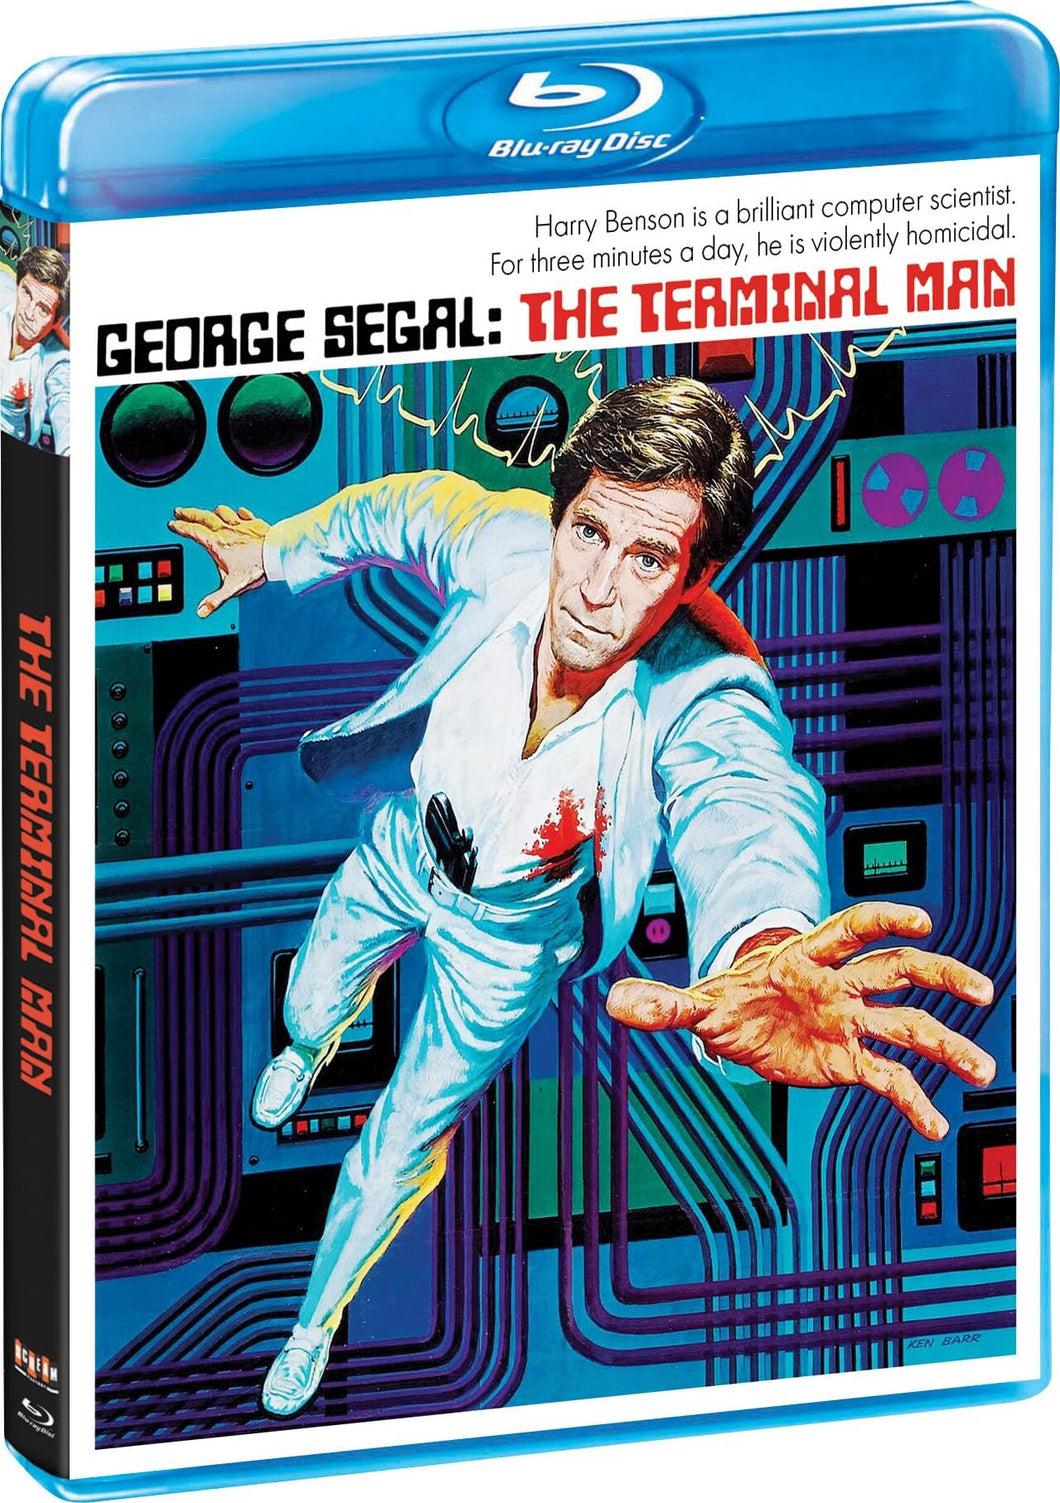 The Terminal Man (1974) - front cover